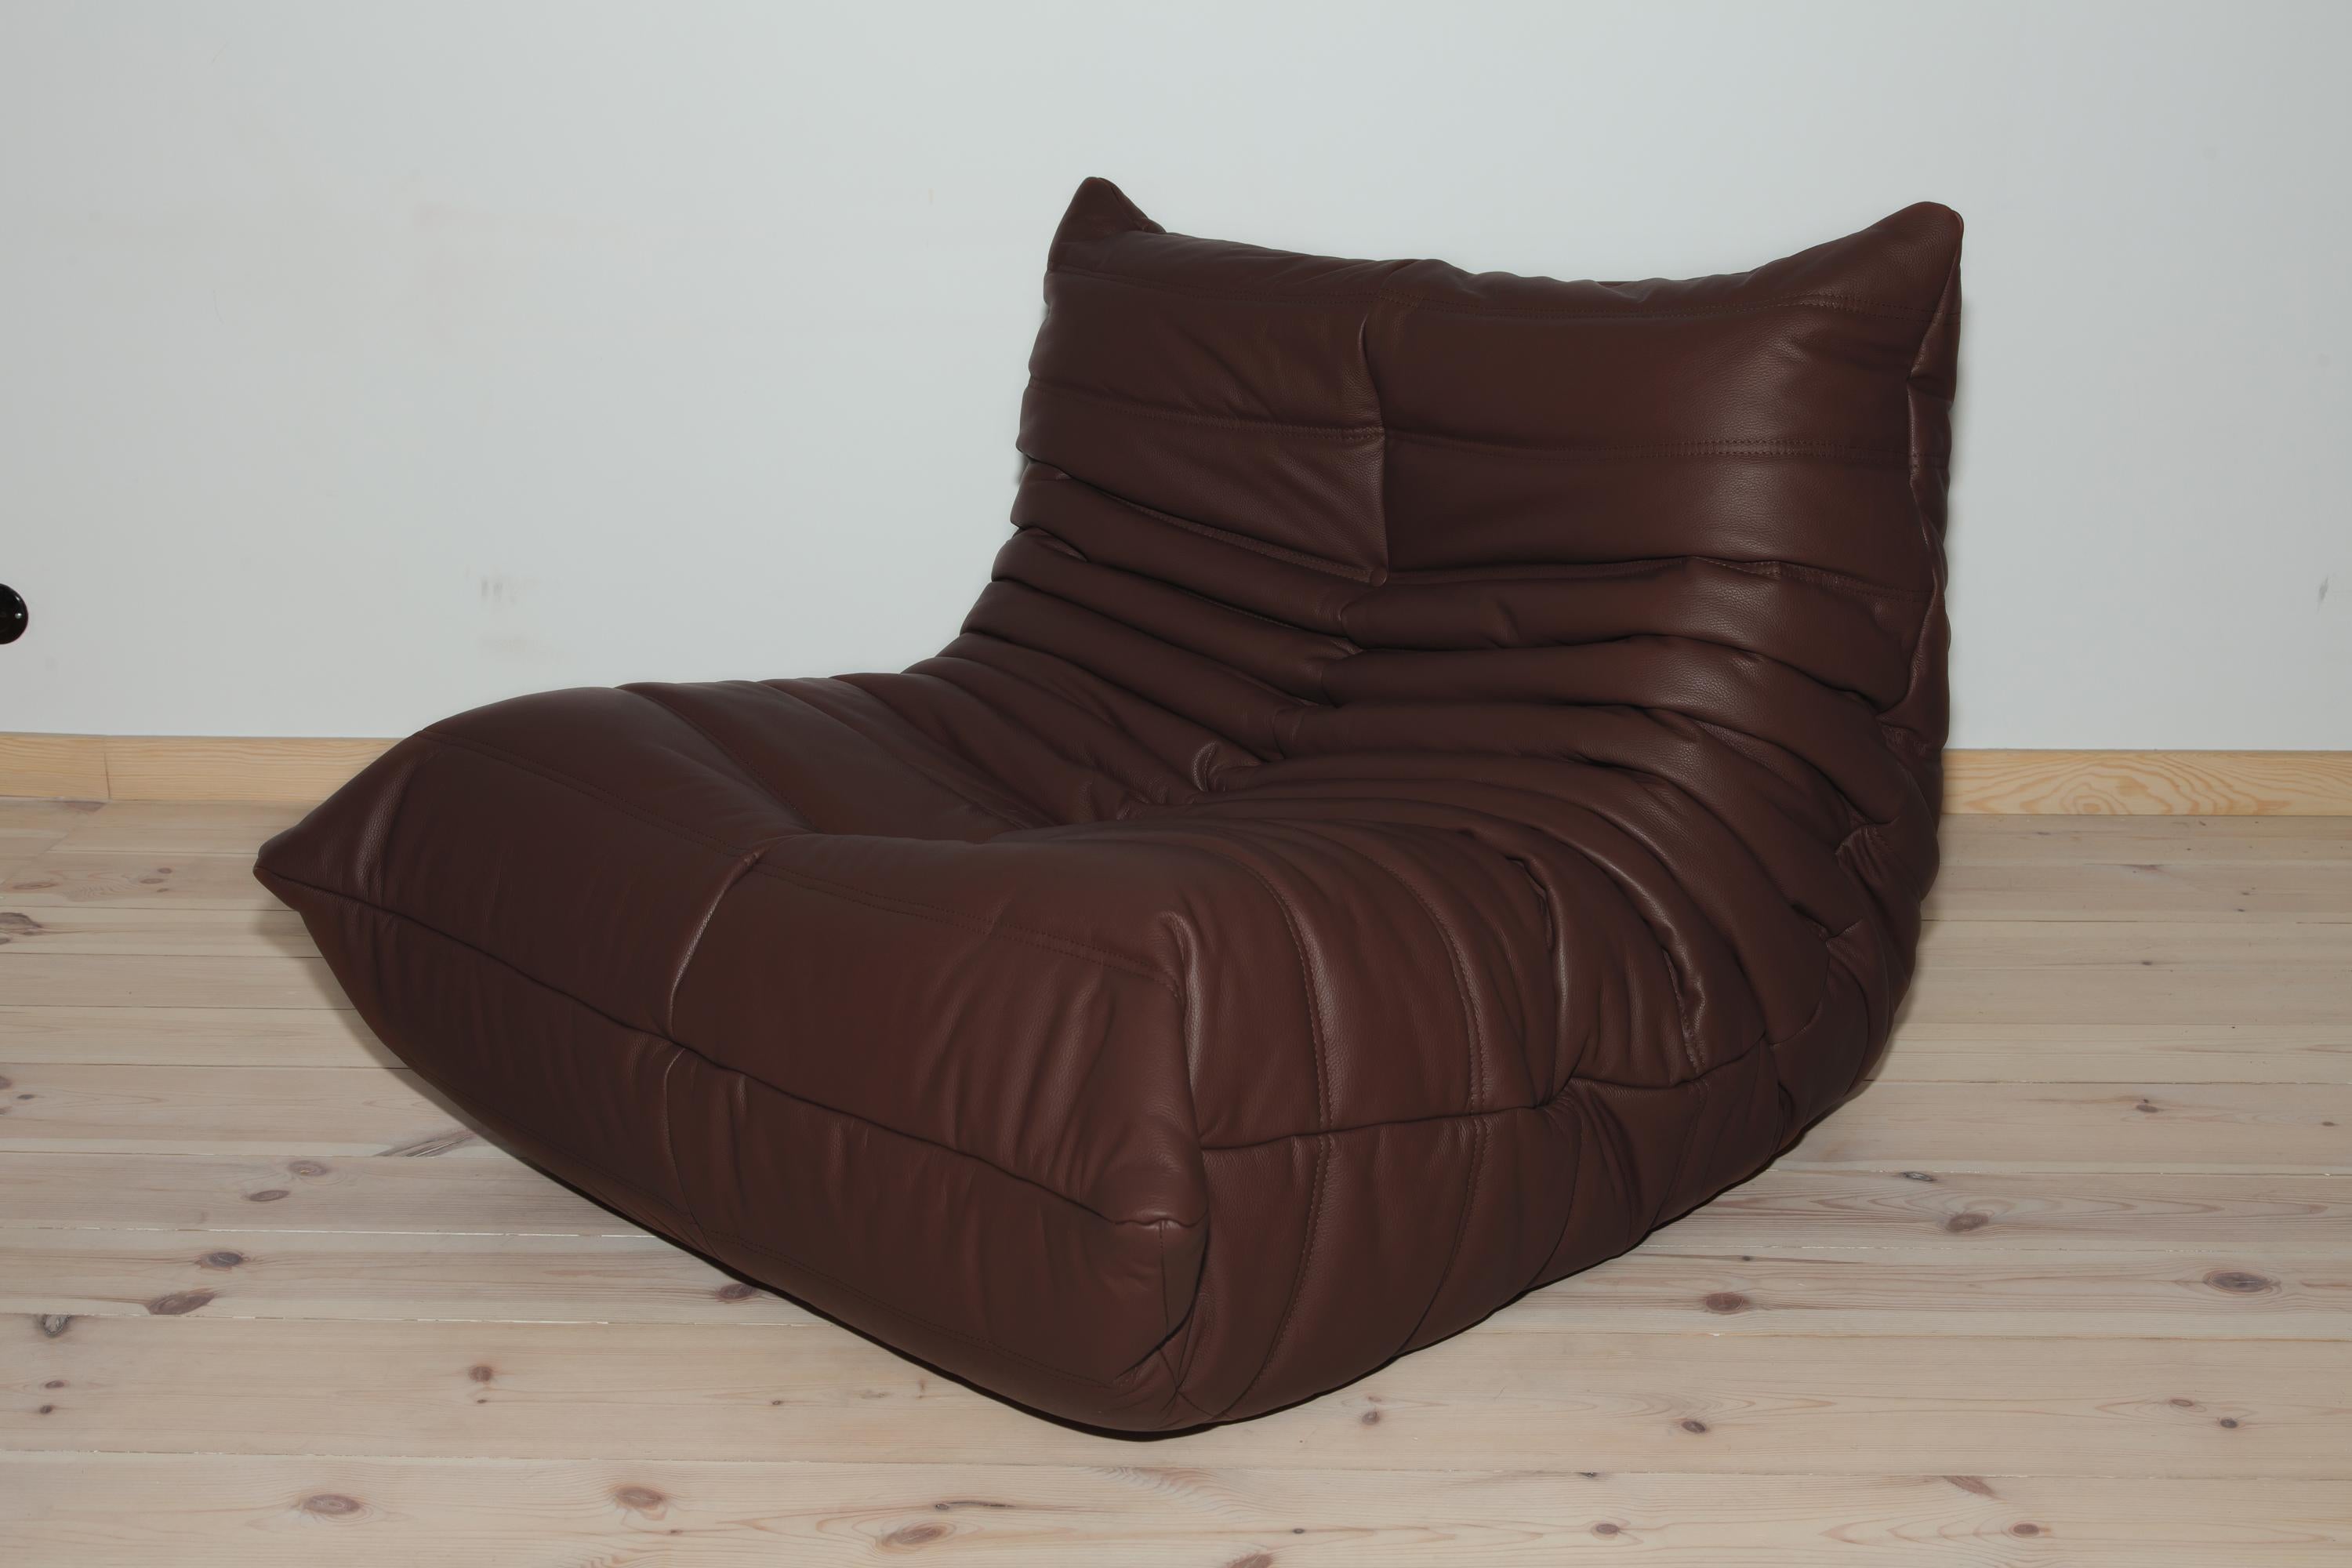 This Togo longue chair was designed by Michel Ducaroy in 1973 and was manufactured by Ligne Roset in France. It has been reupholstered in new brown madras 10016 leather (87 x 102 x 70 cm). It has the original Ligne Roset logo and genuine Ligne Roset